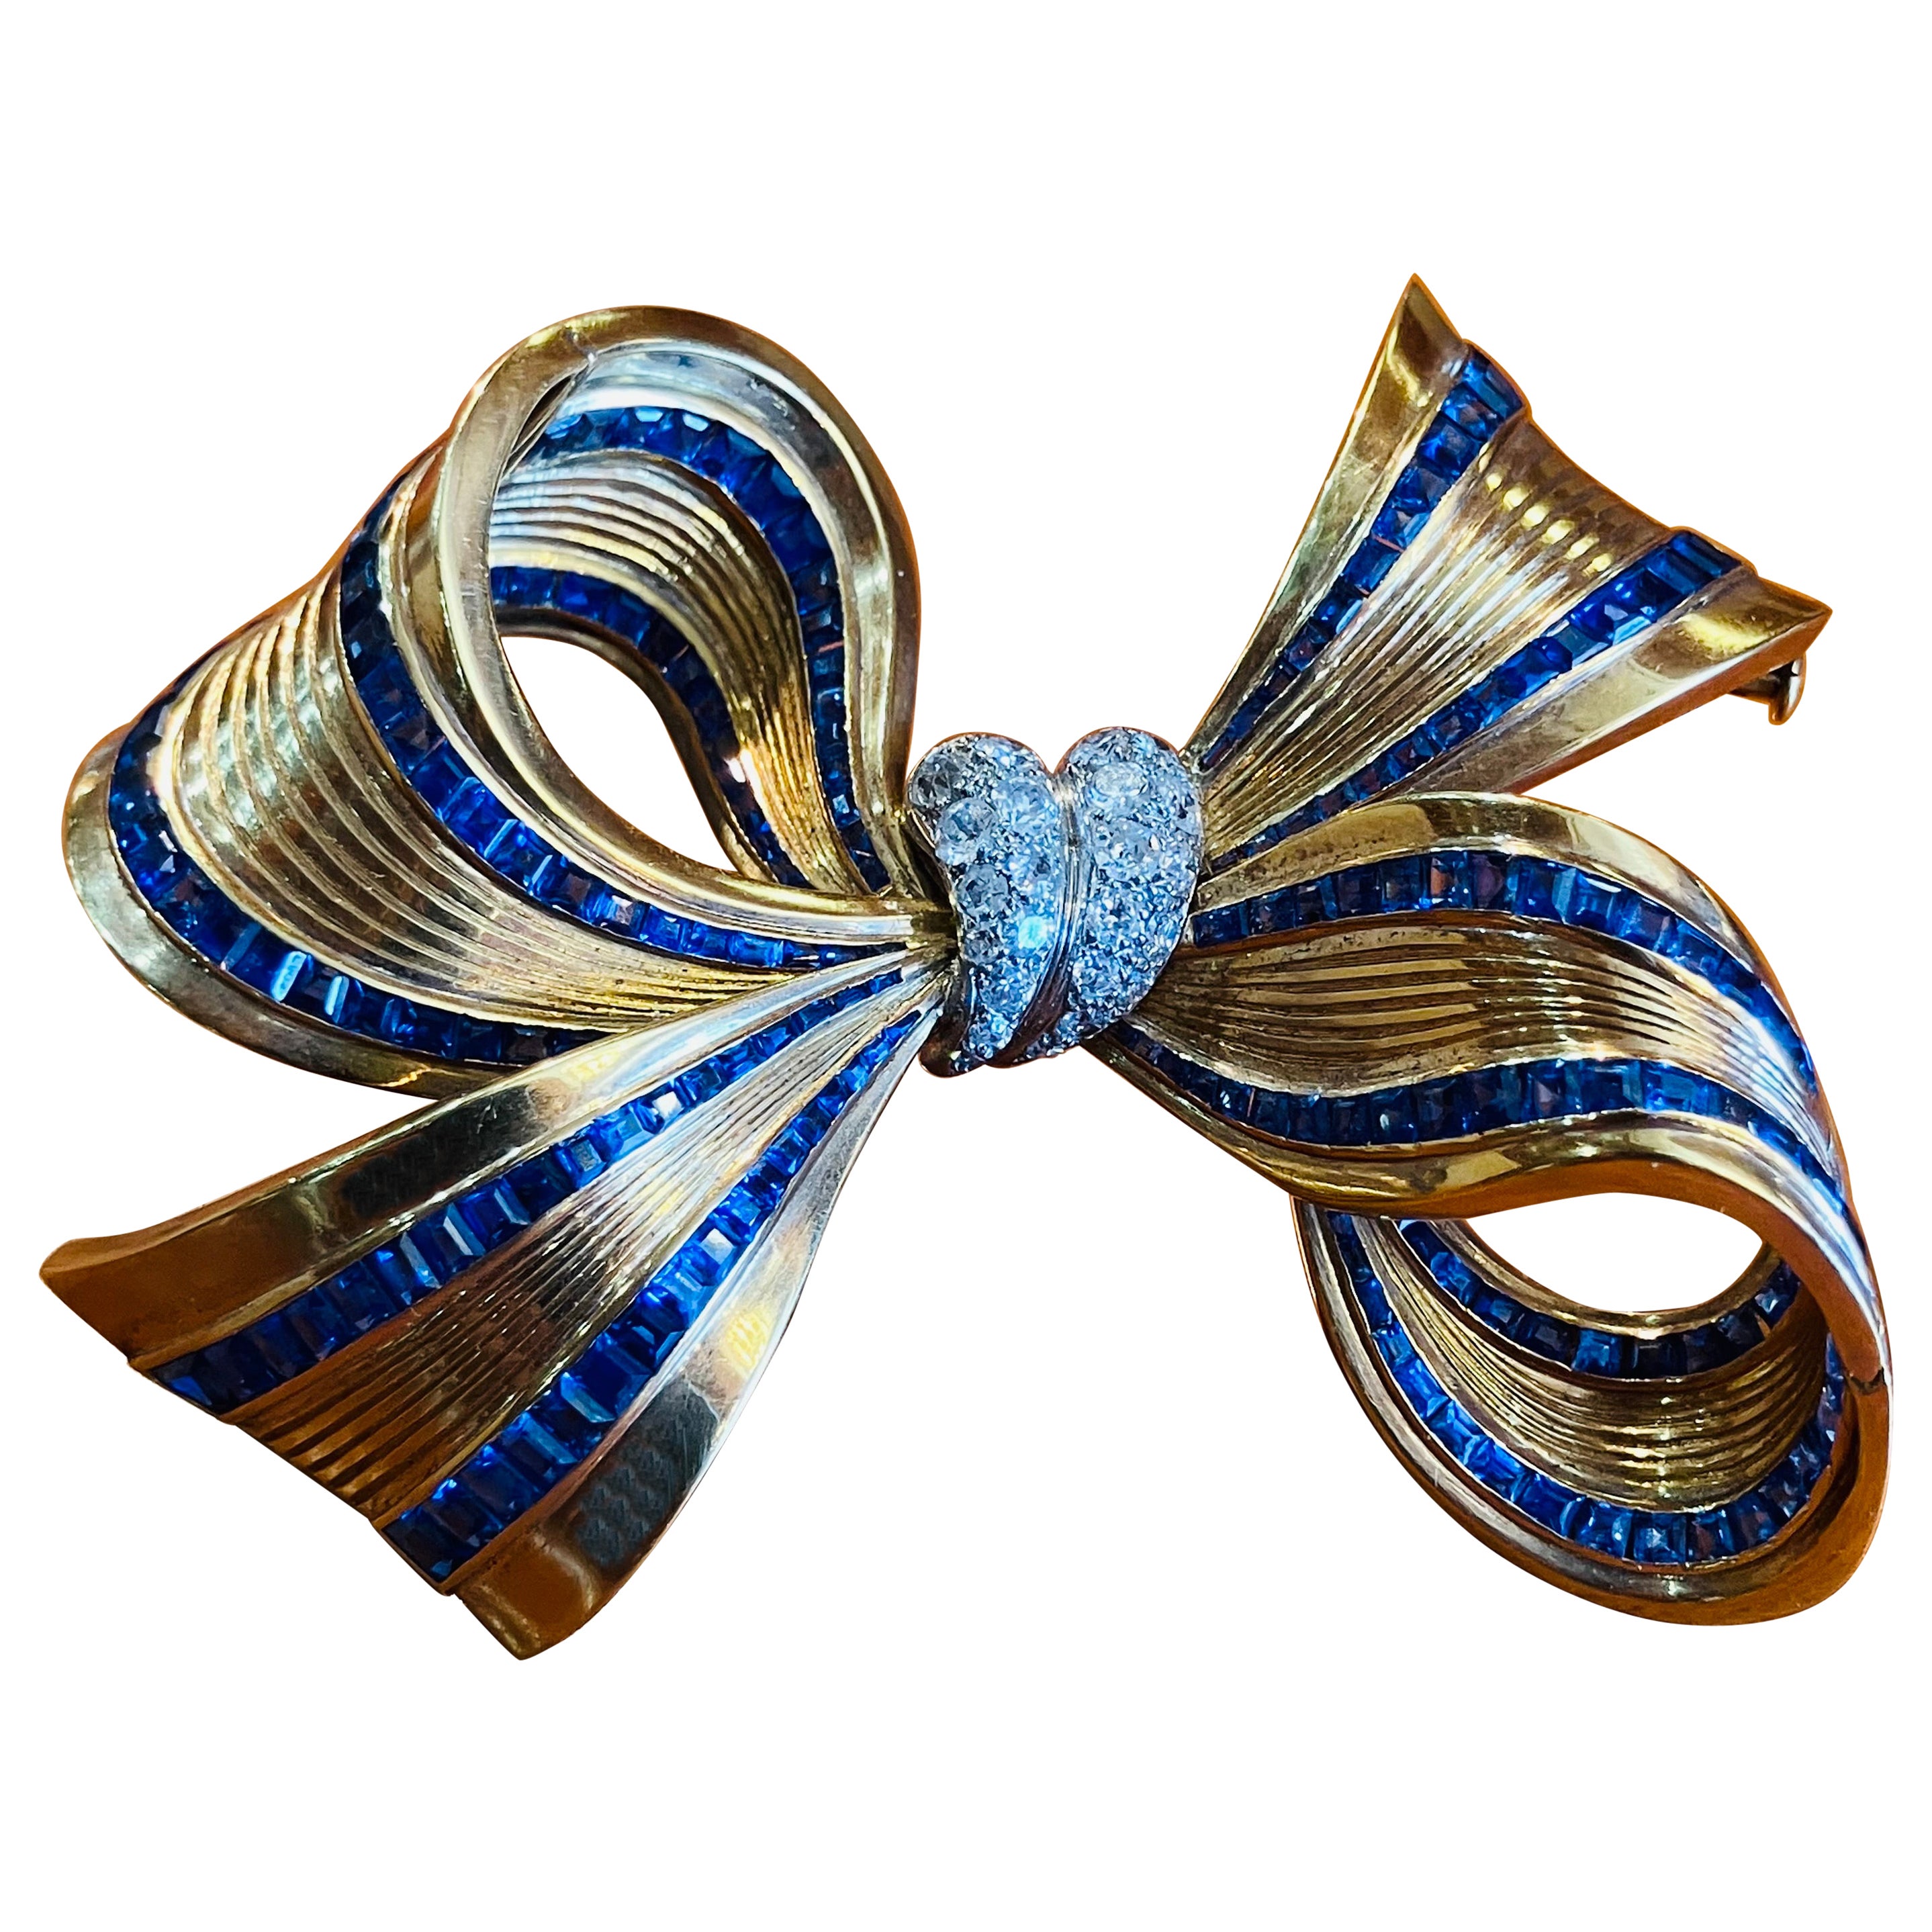 Magnificent Van Cleef & Arpels Retro period Large  Bow Brooch with Invisible Sapphire setting . 